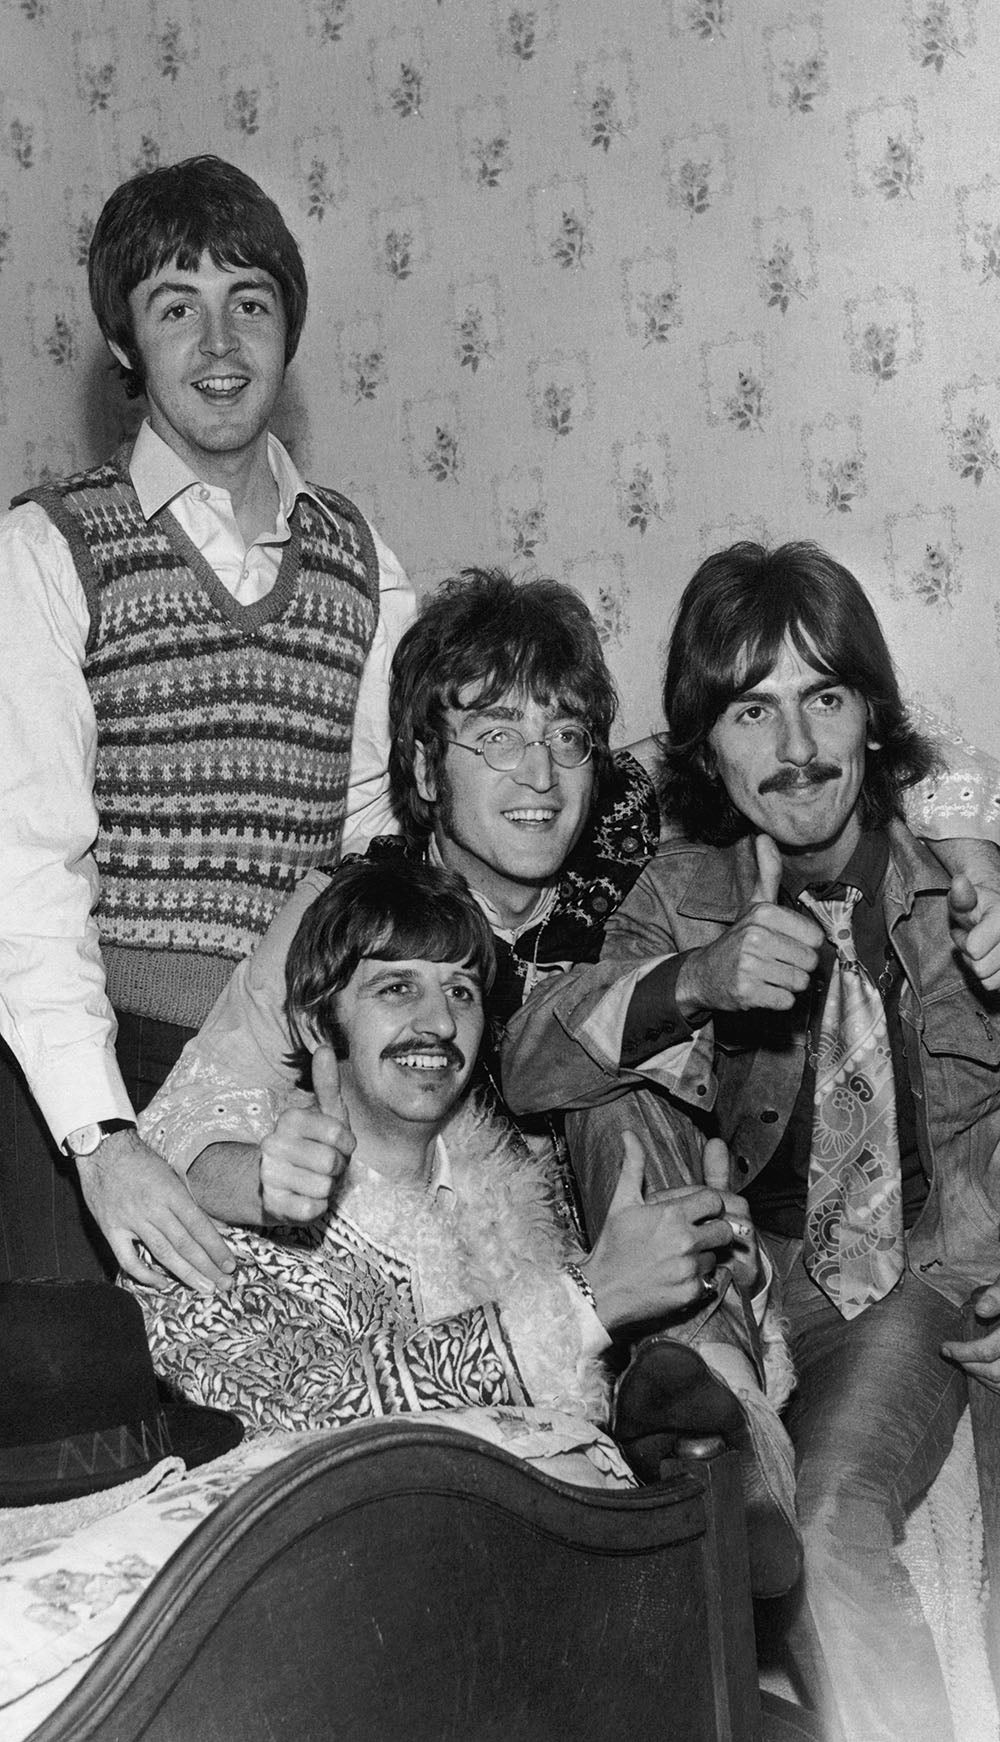 The Beatles, as pictured in 1967